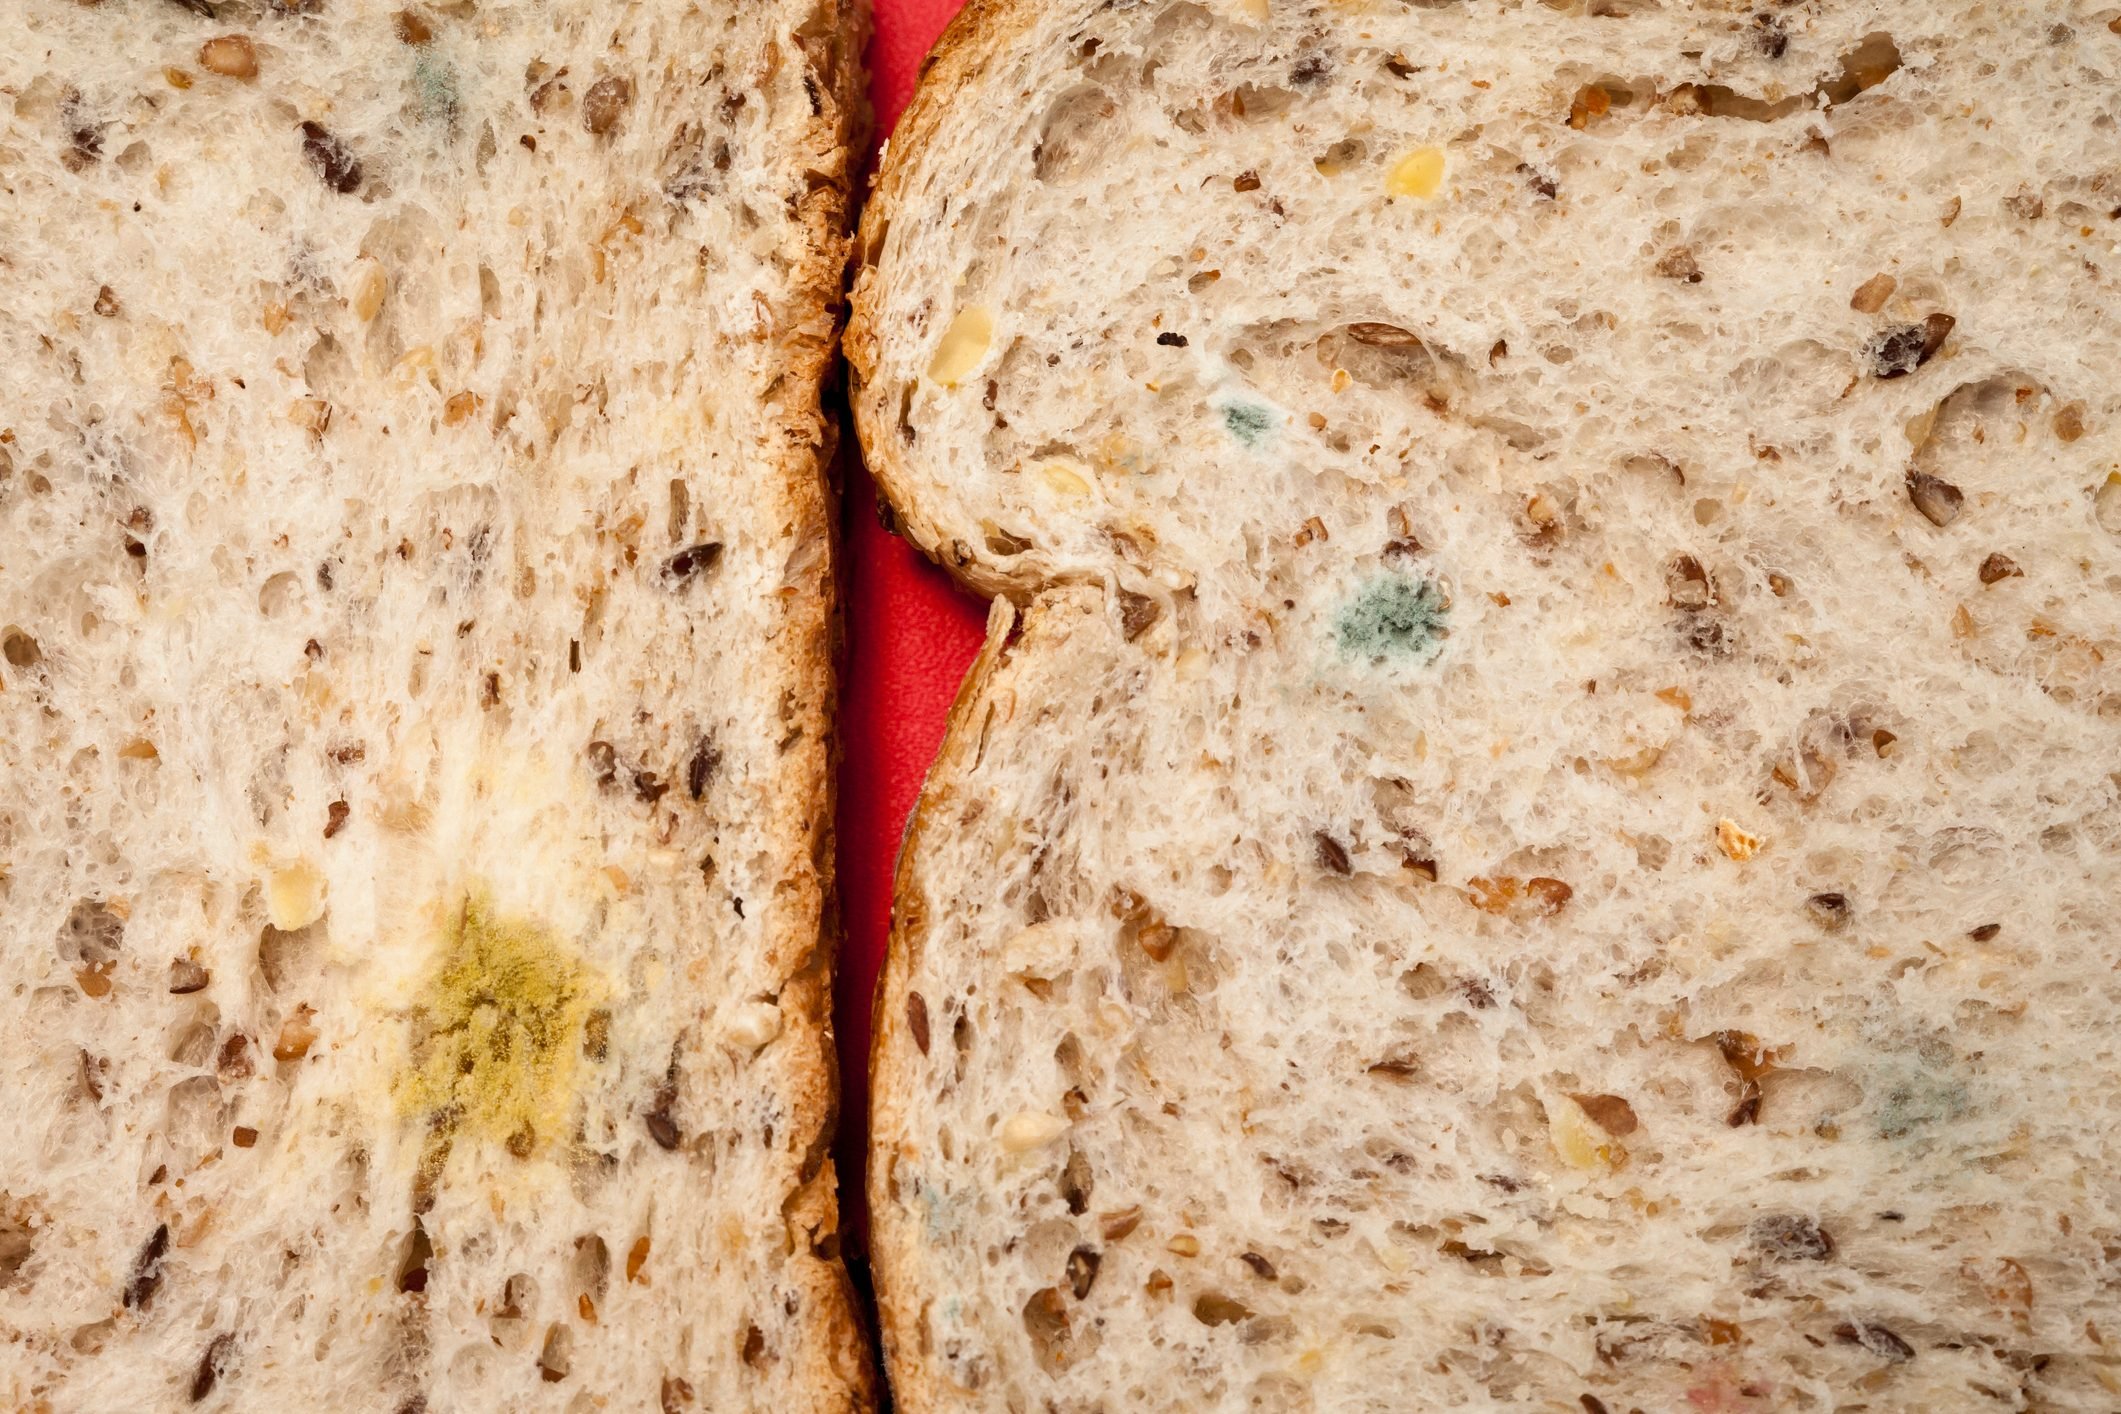 What to do when you see mold on your food